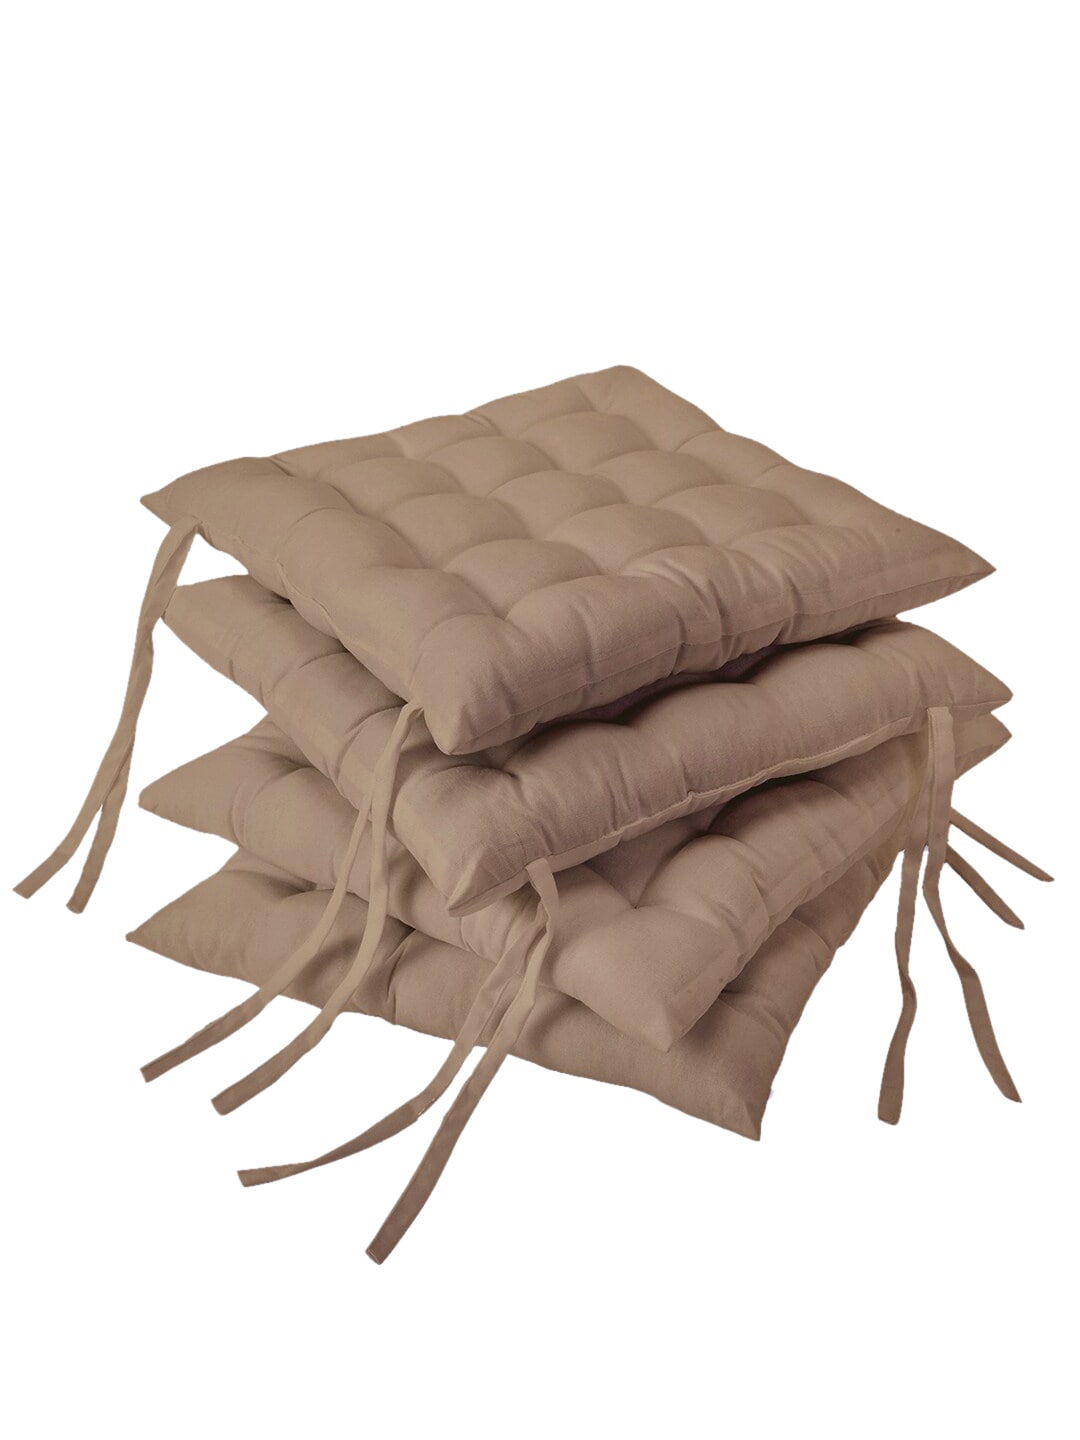 Encasa Homes Set of 4 Beige Solid Cotton Chair Pads Price in India